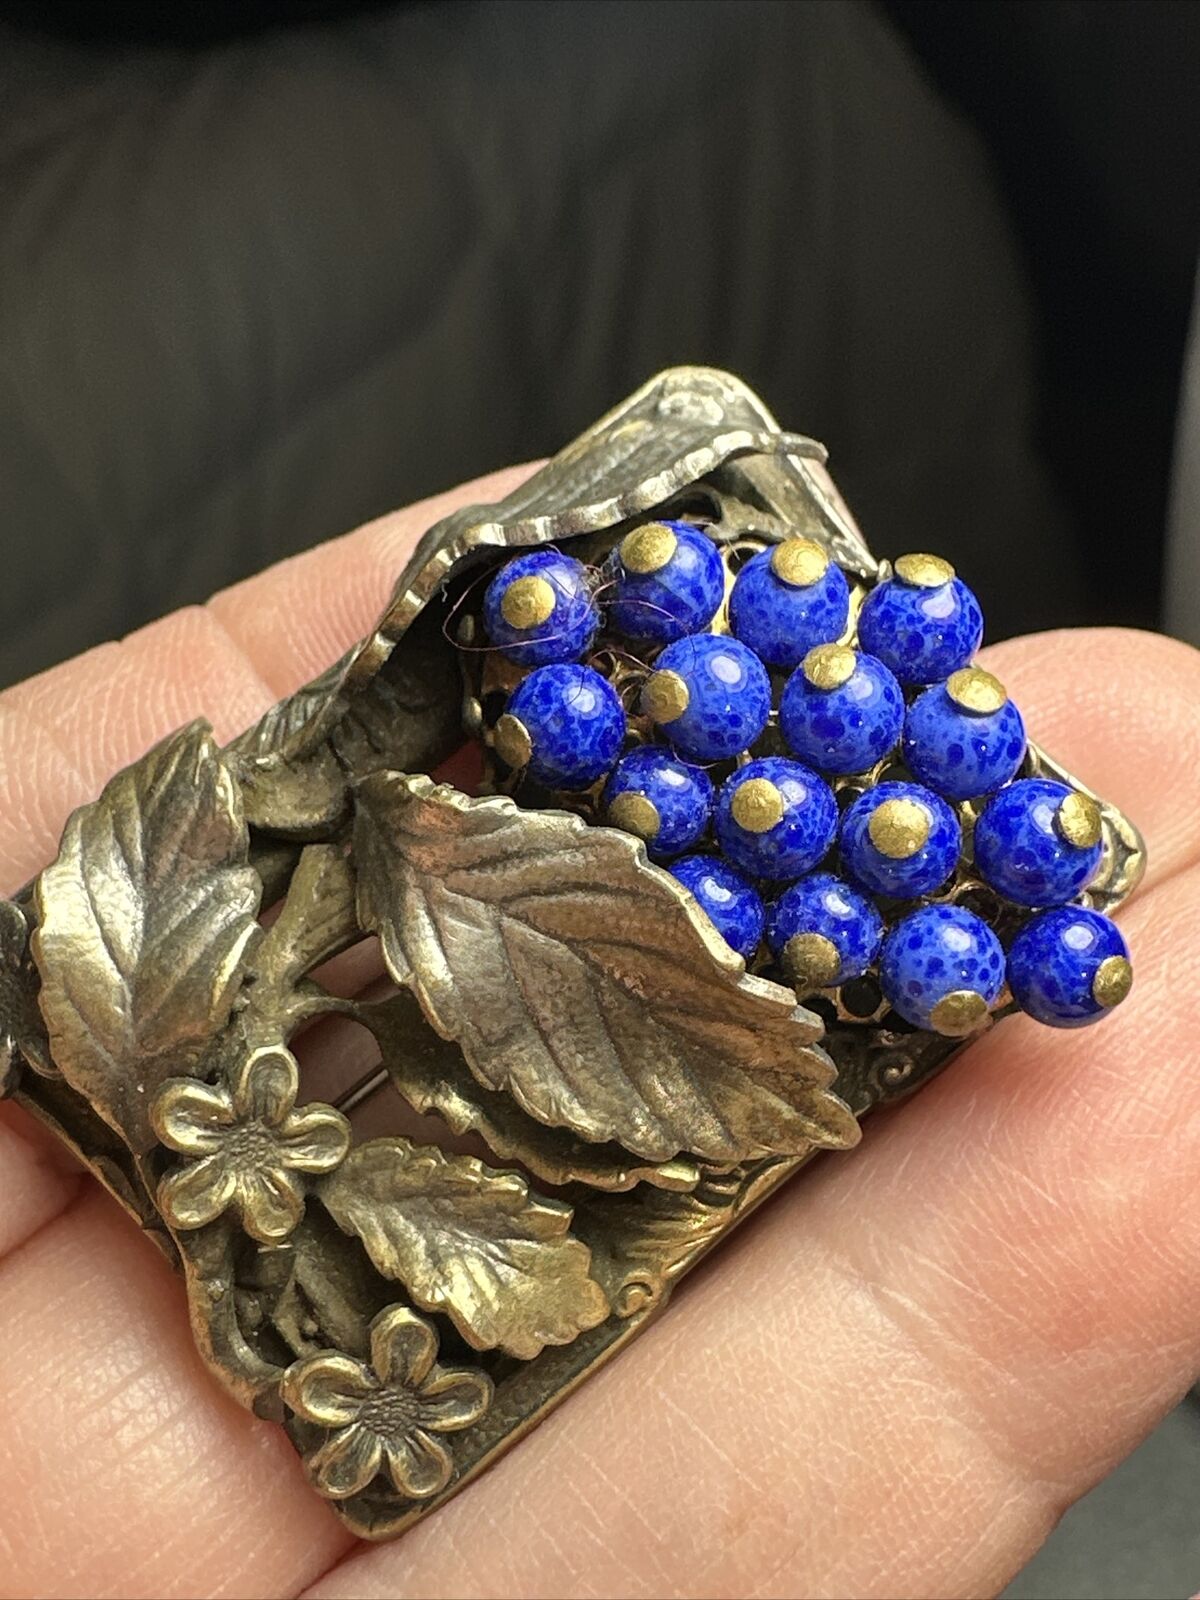 Stunning Vintage Brooch With Blue Glass Grapes